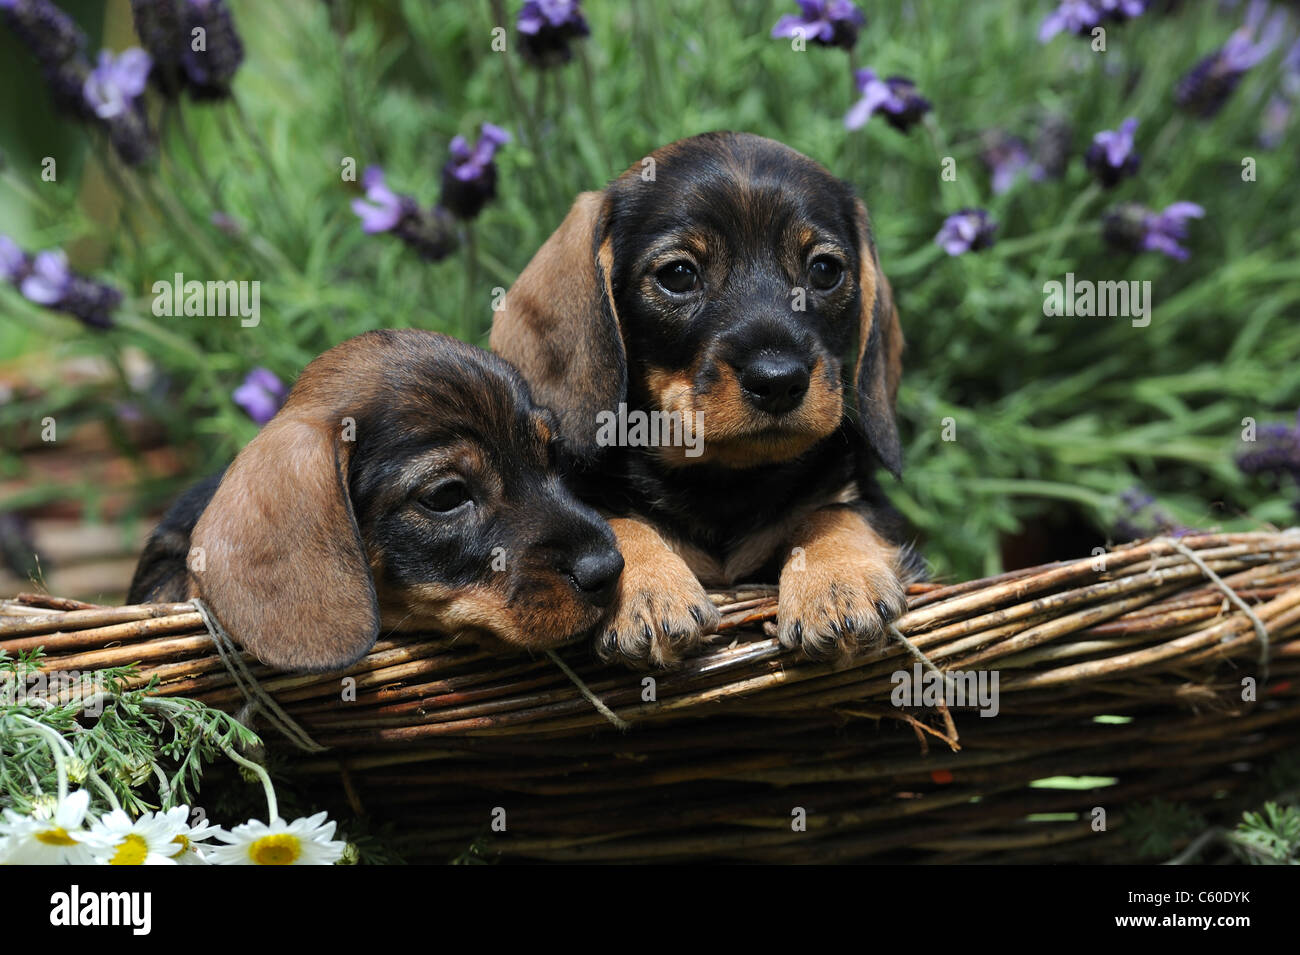 Wire-haired Dachshund (Canis lupus familiaris). Two puppies in a basket in a flowering garden in spring. Stock Photo